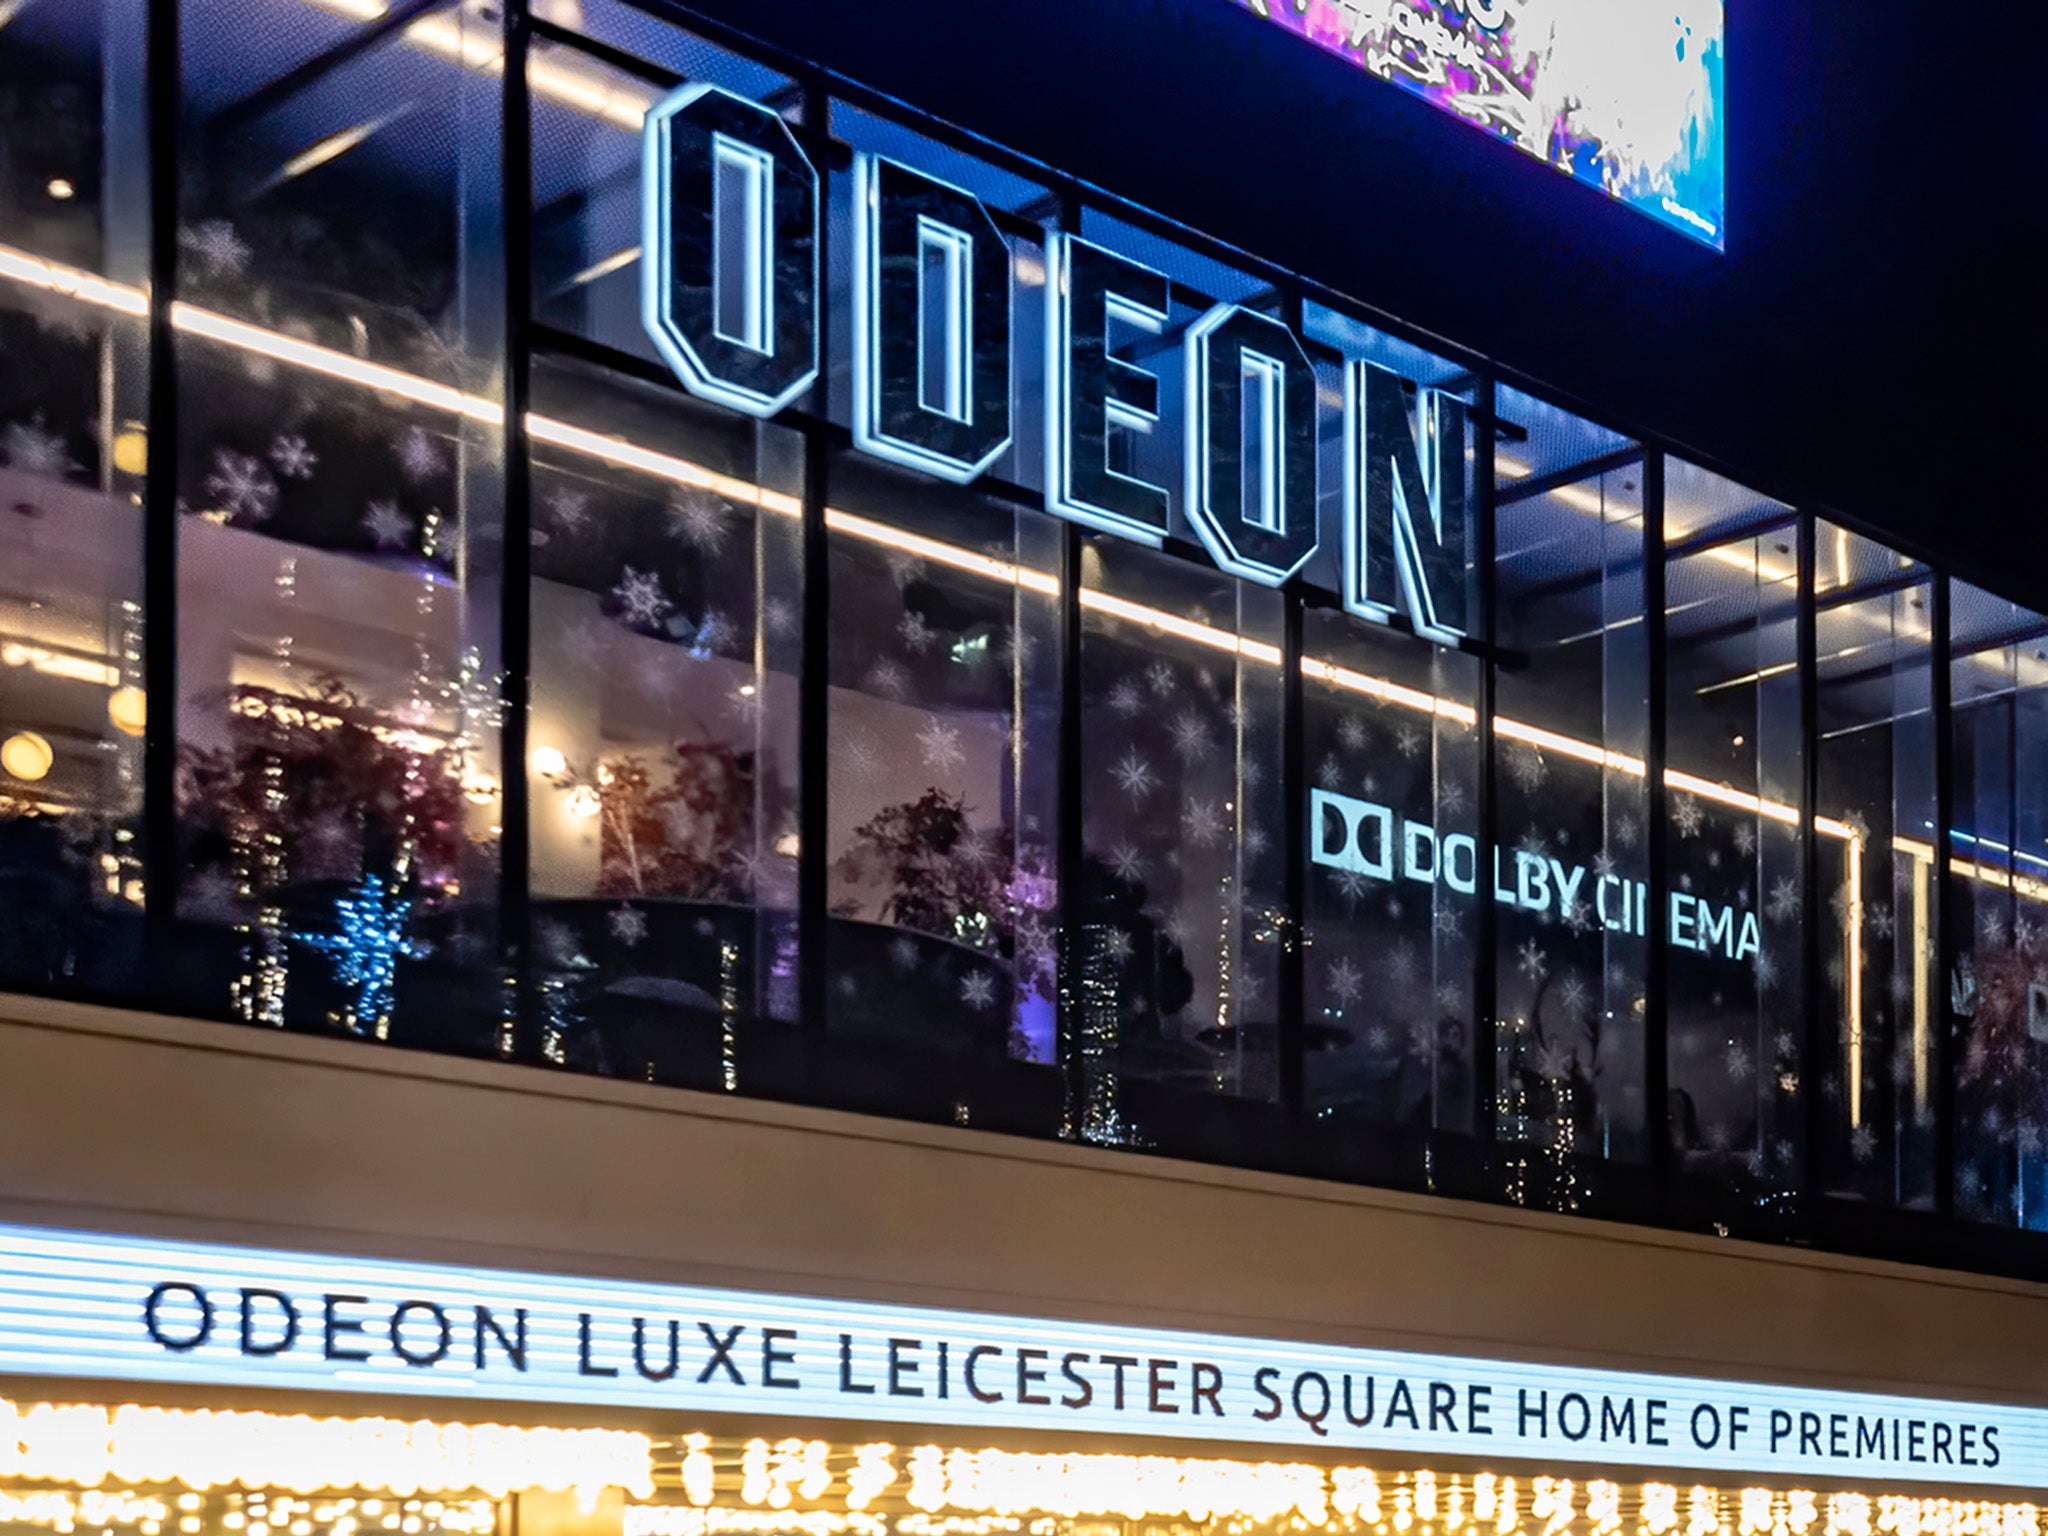 Odeon is investing in buffing up its product